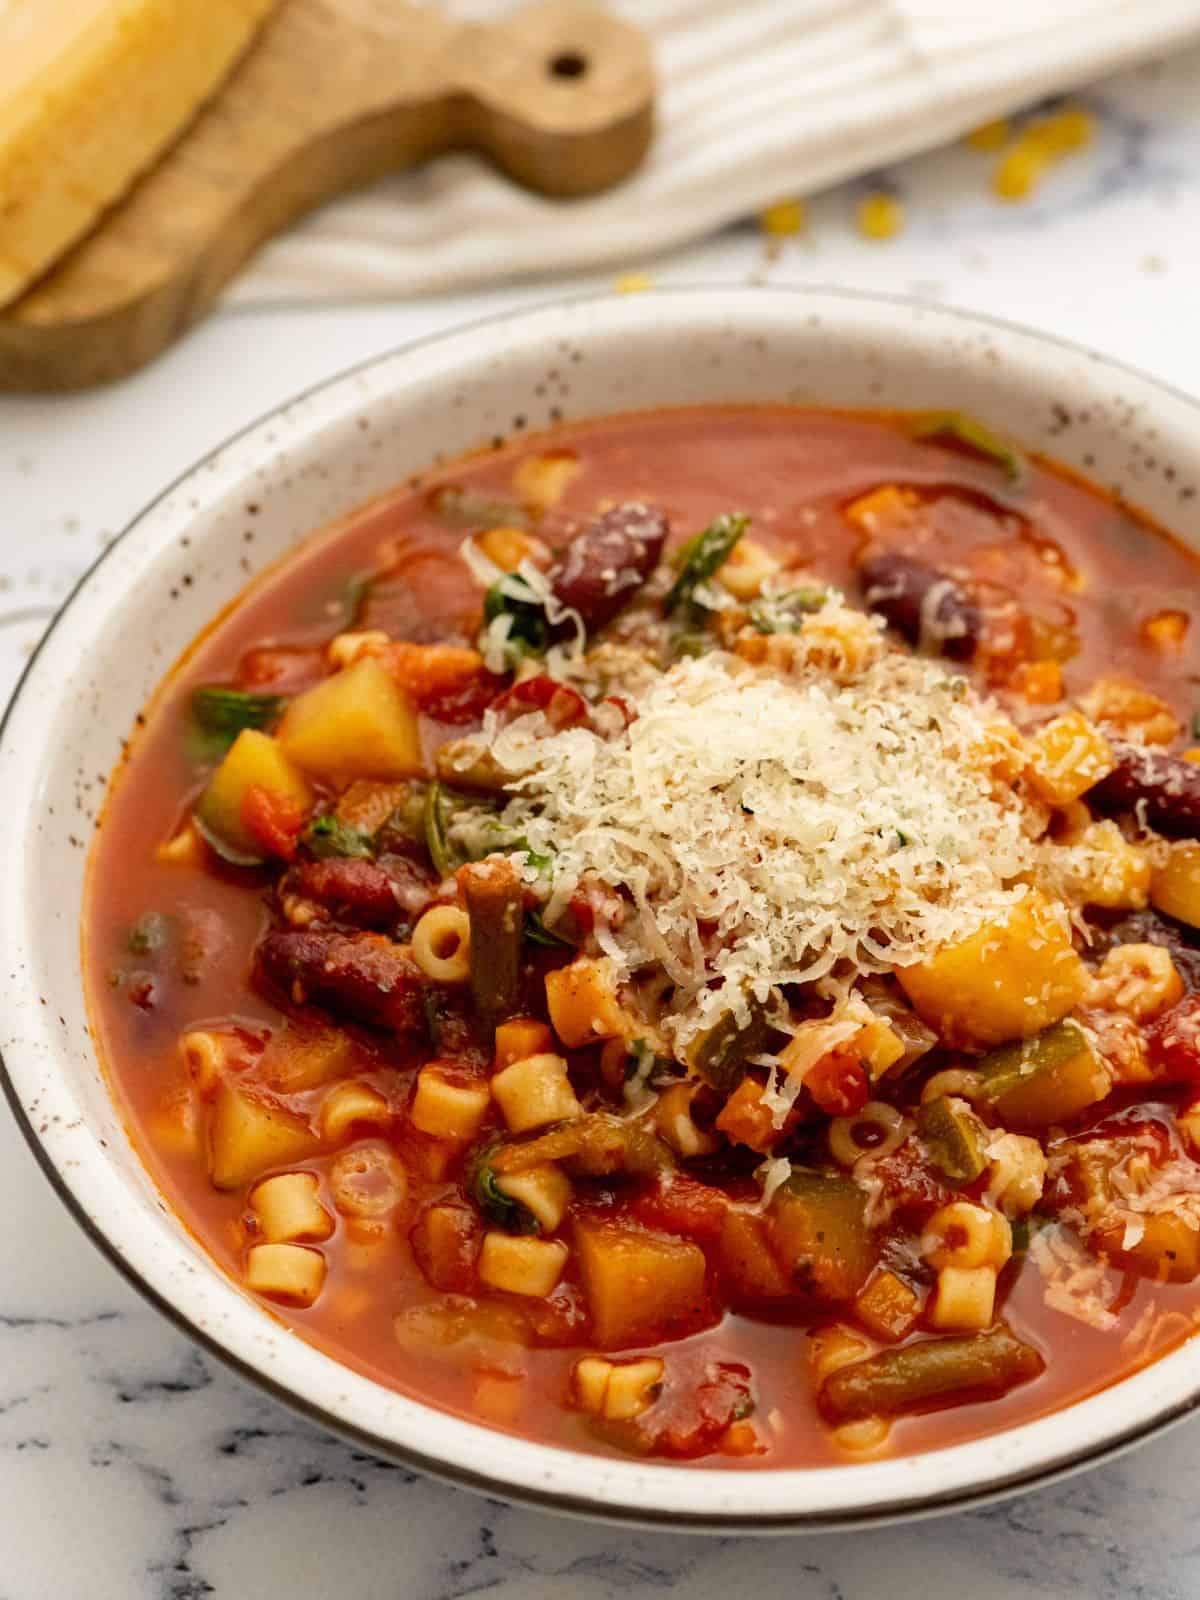 Bowl of slow cooker minestrone topped with parmesan cheese.